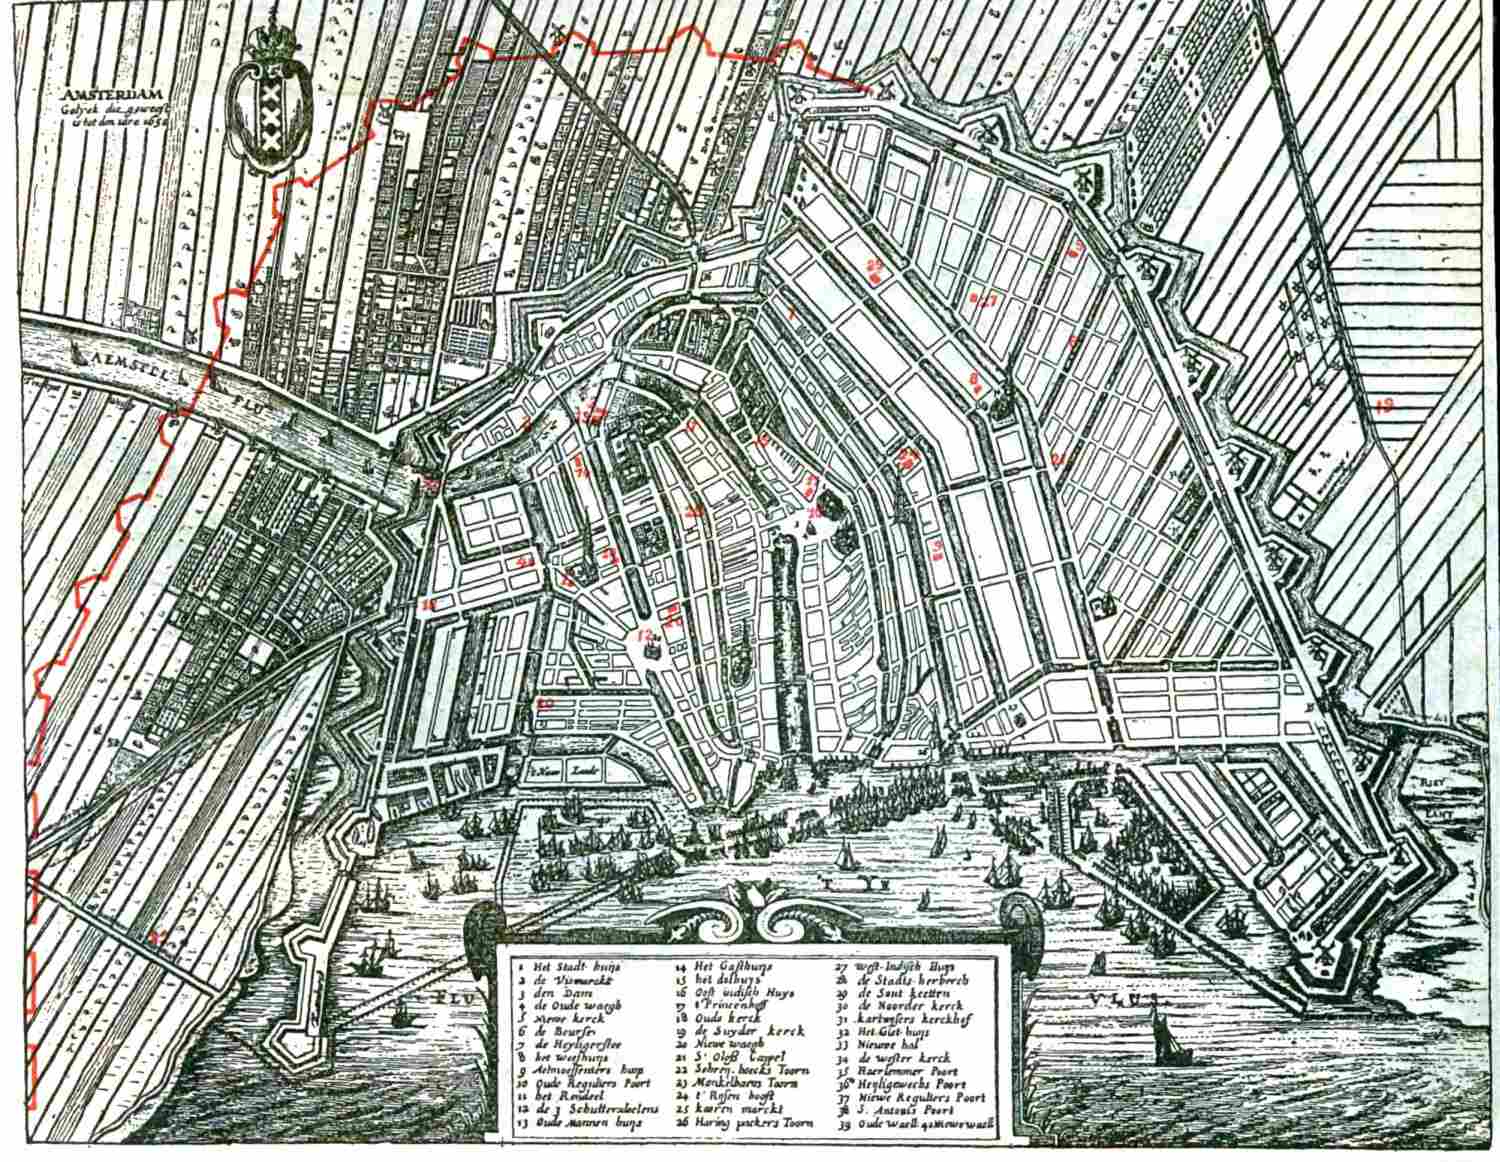 Plan of the City of Amsterdam about 1650